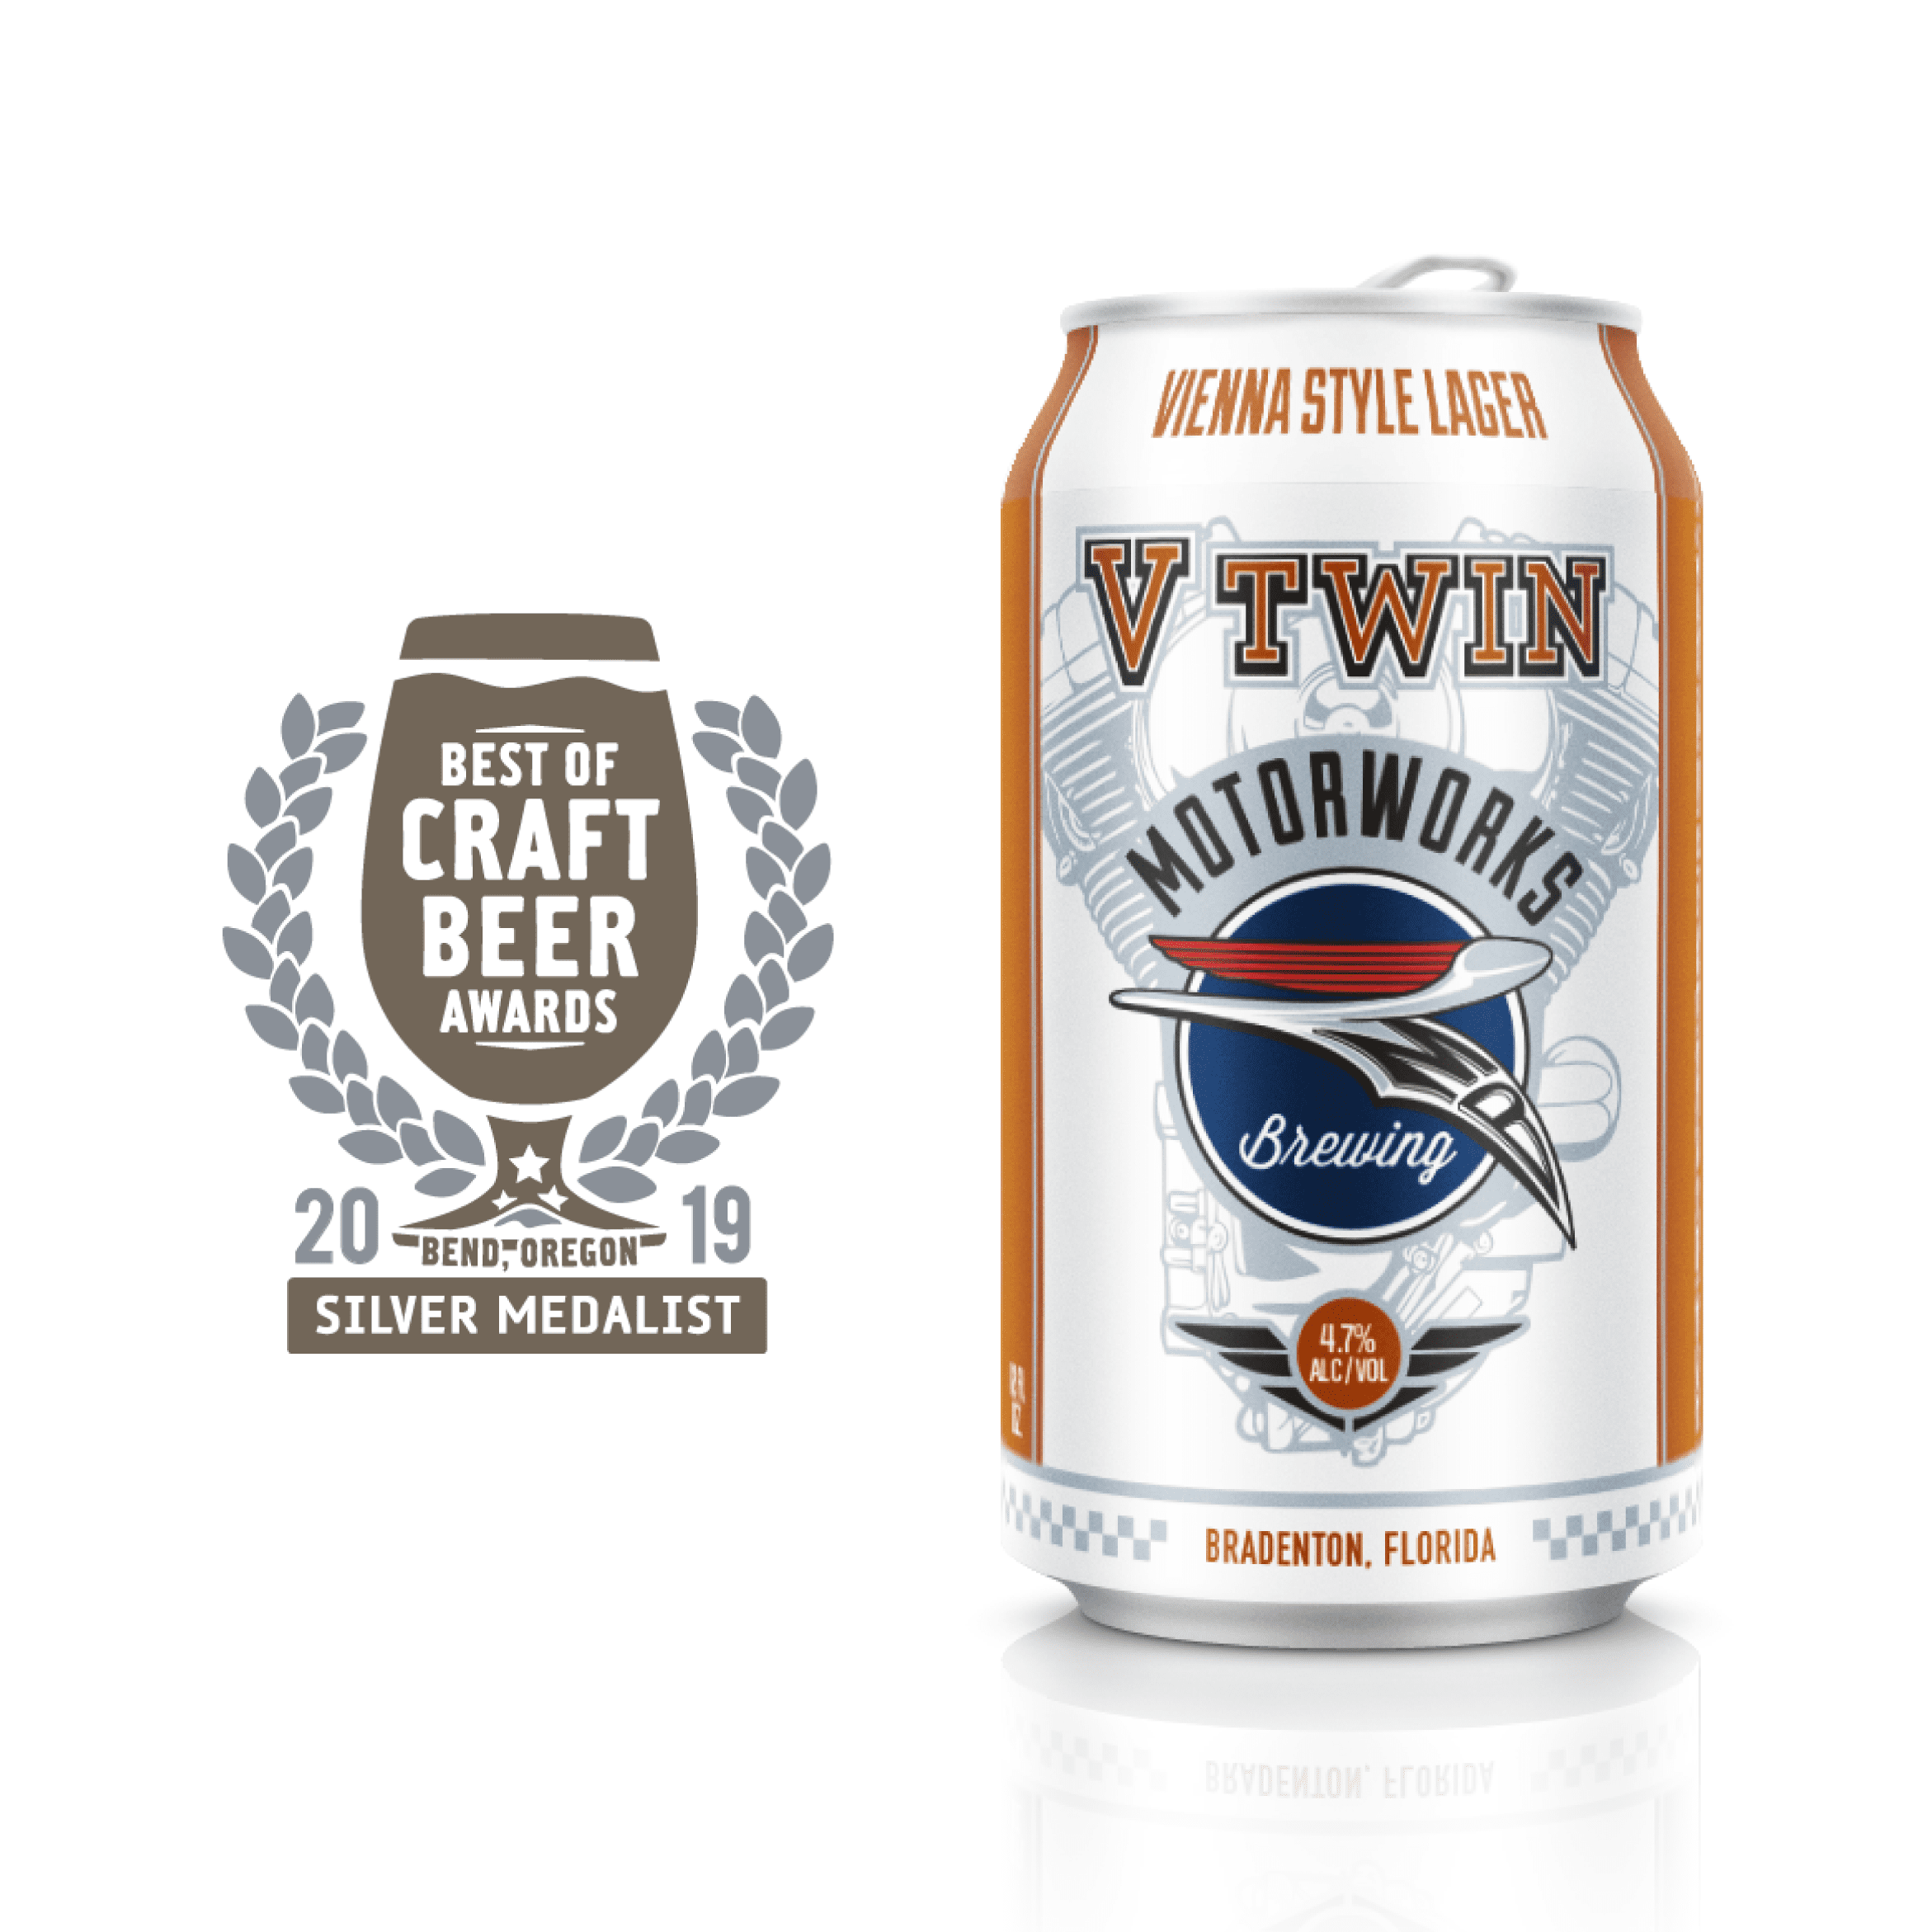 Motorworks Brewing V Twin Vienna Style Lager can next to the Best of Crat Beer Awards 2019 Silver medal